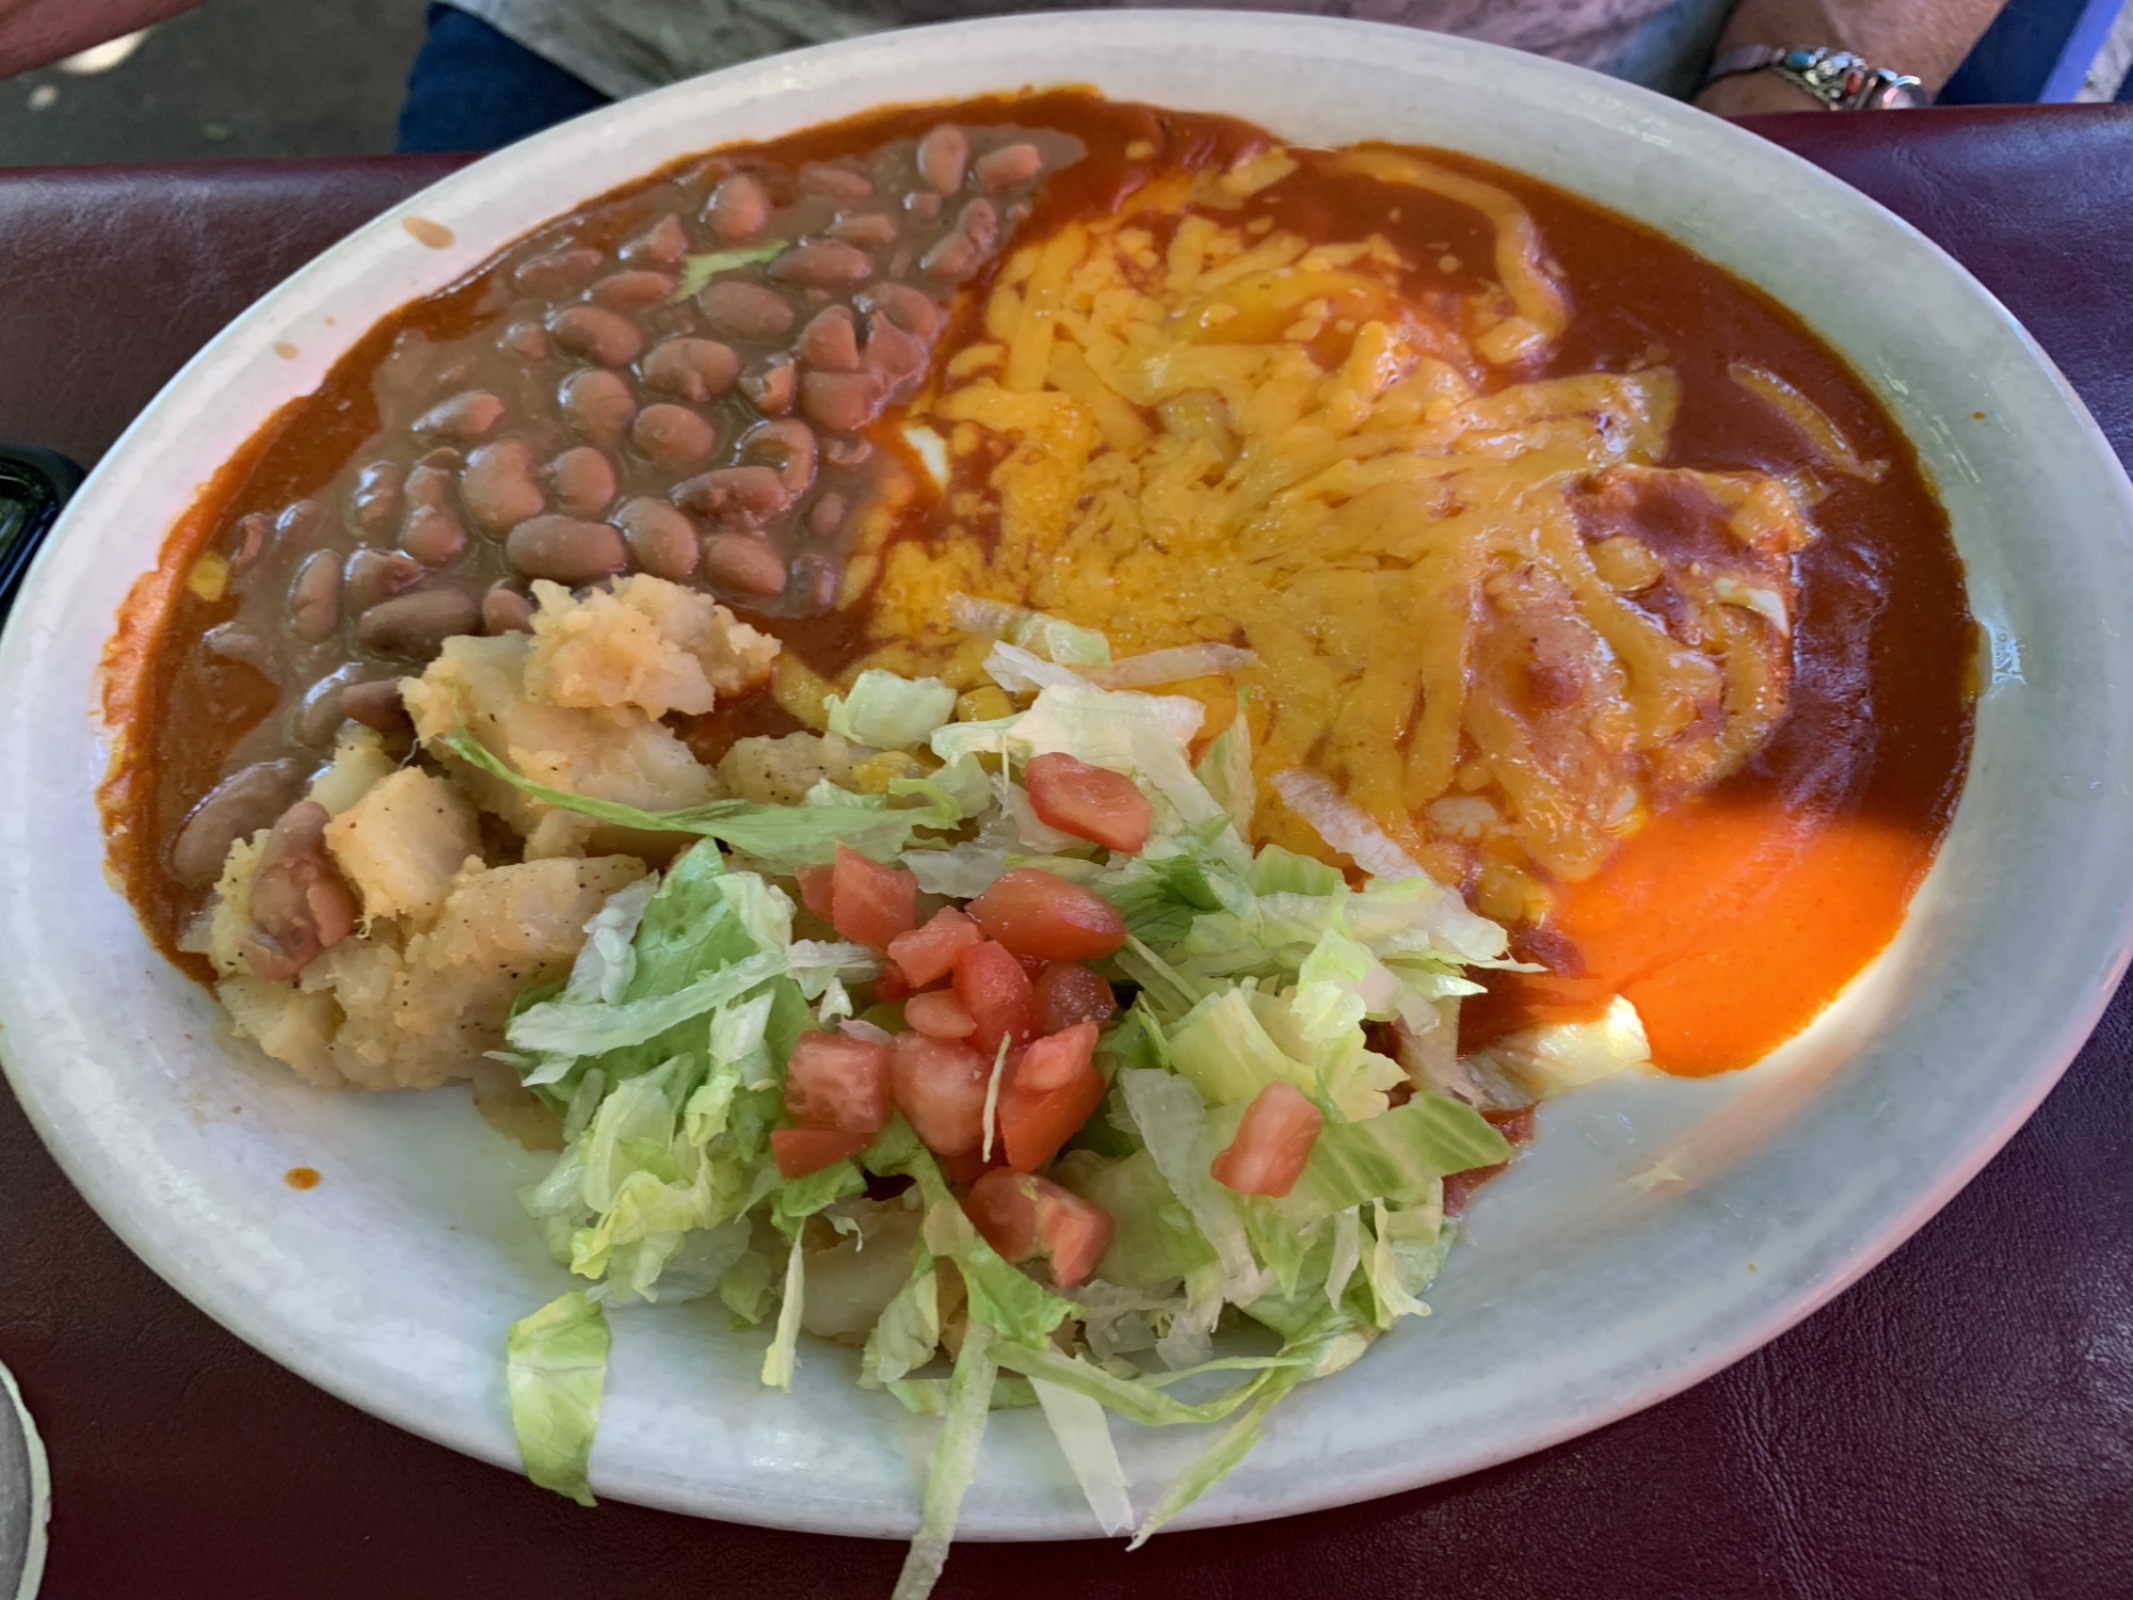 Mom ordered huevos rancheros...  amazing red chile!